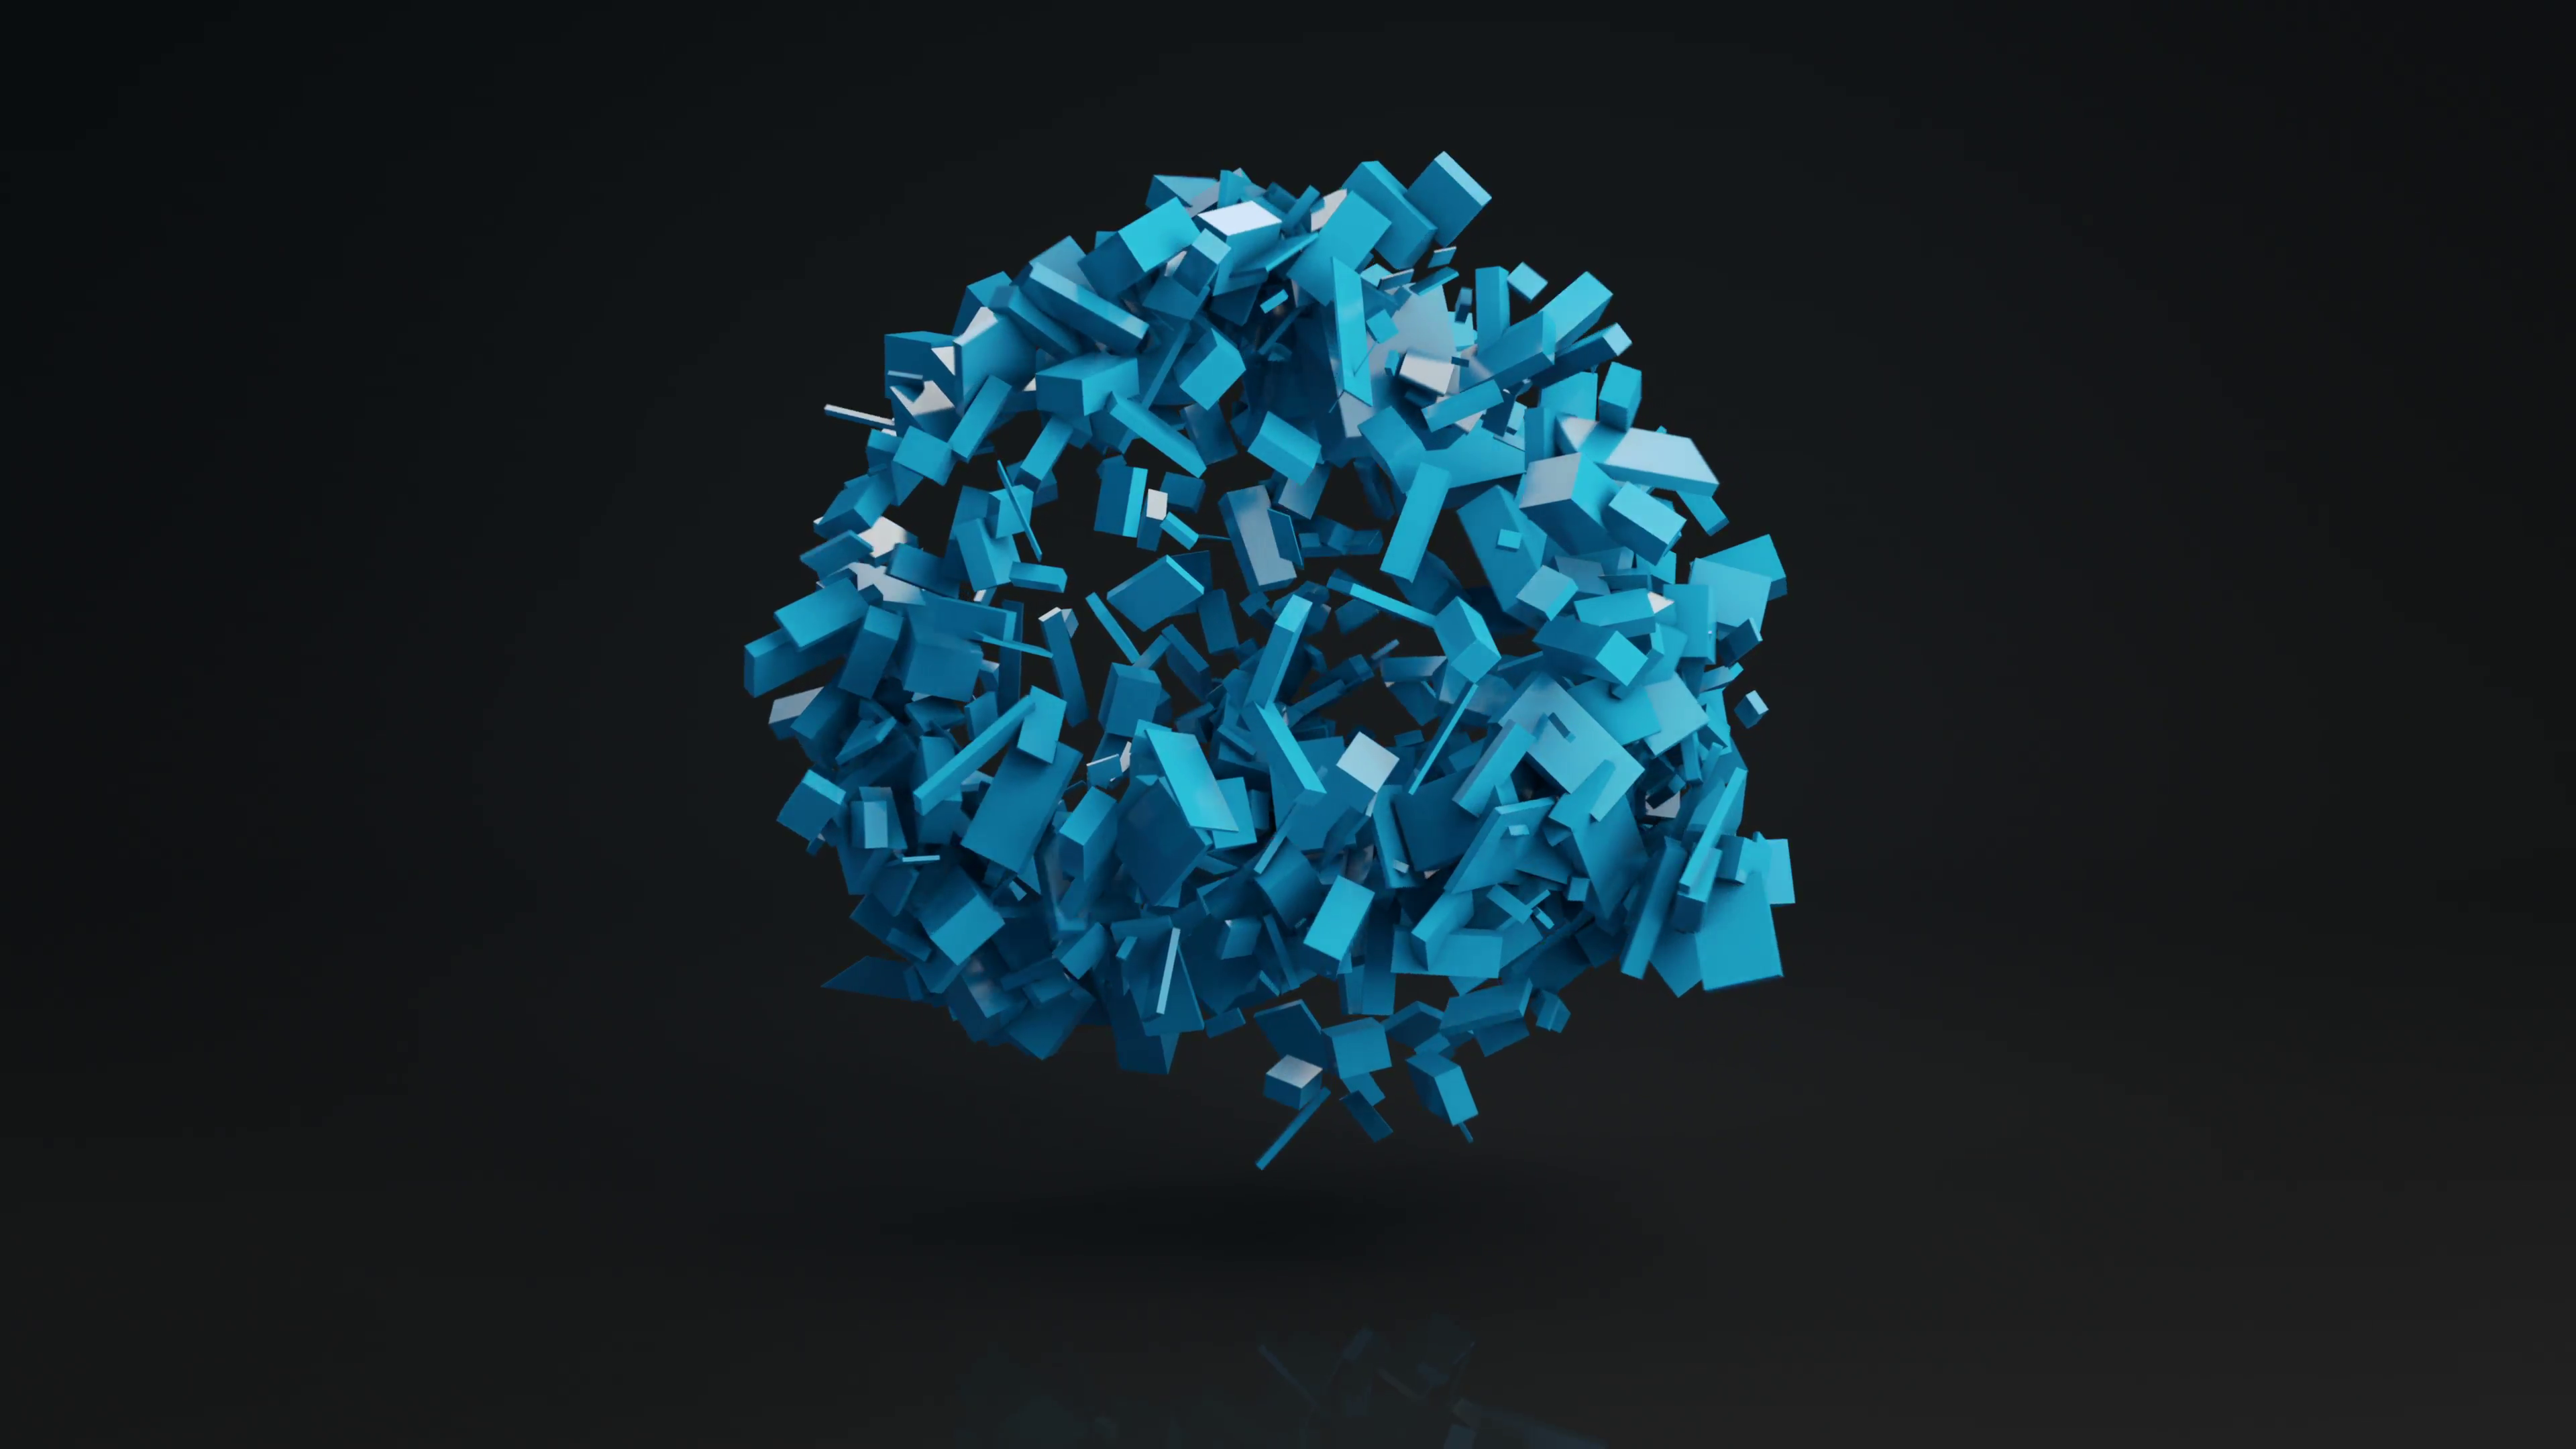 Ball cluster of bricks abstract shape 3D render loopable 4k UHD ...